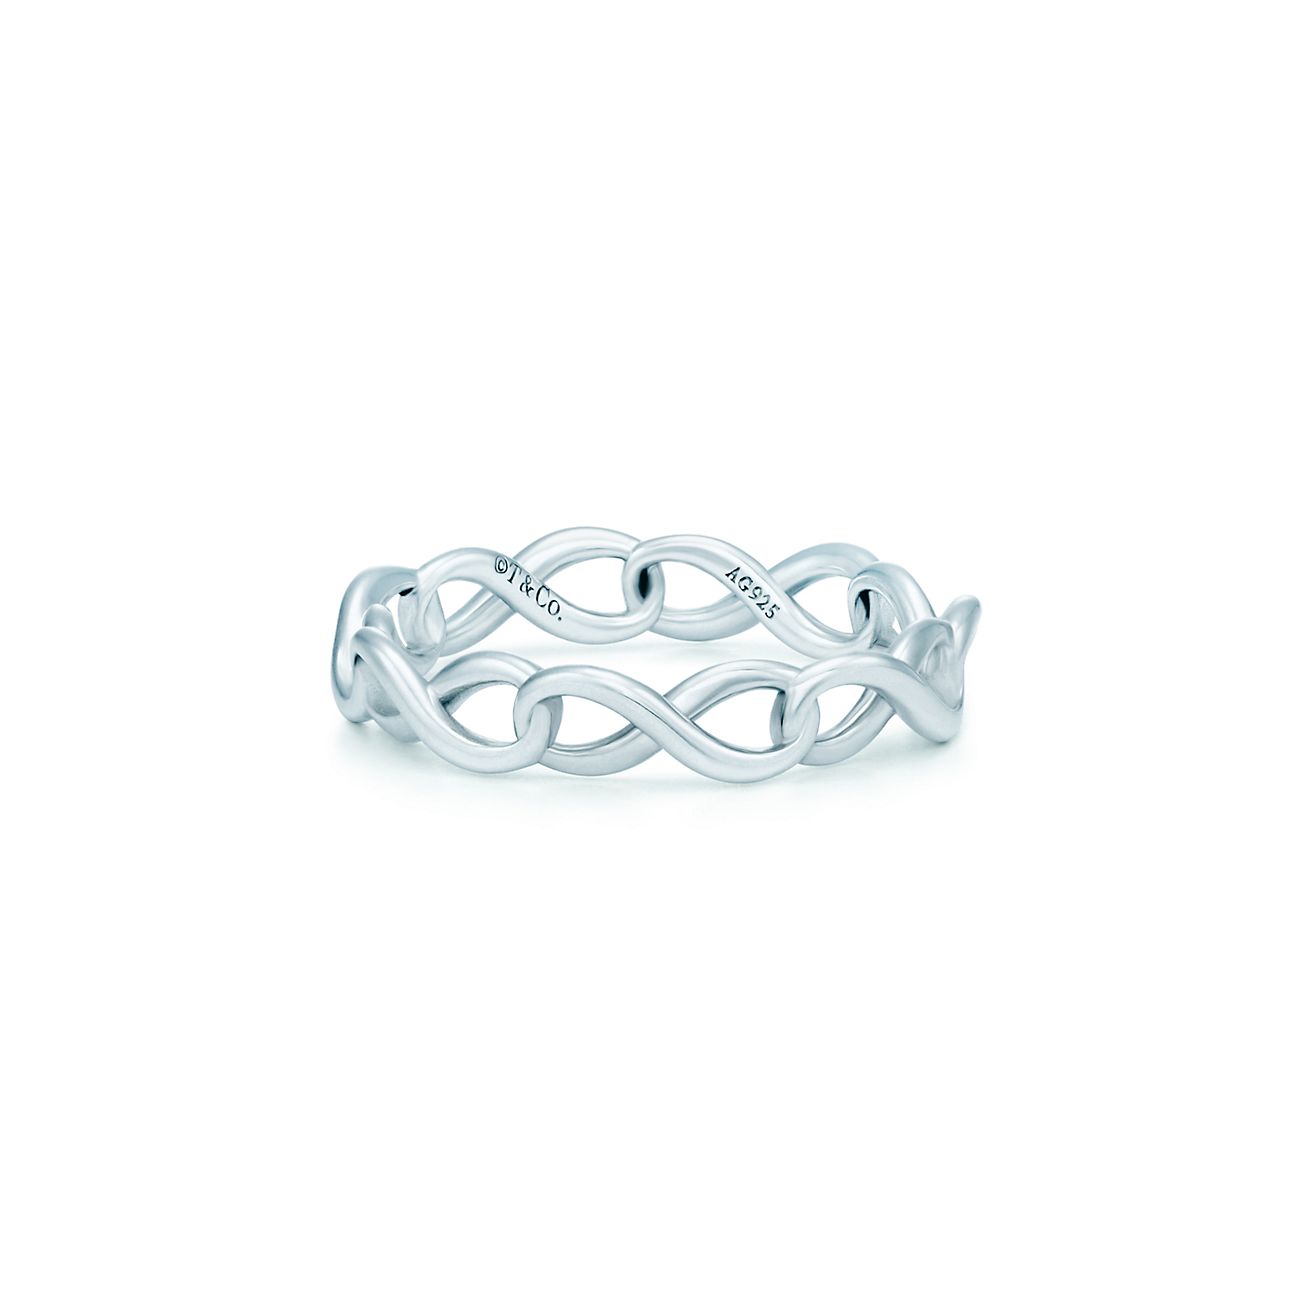 silver band ring